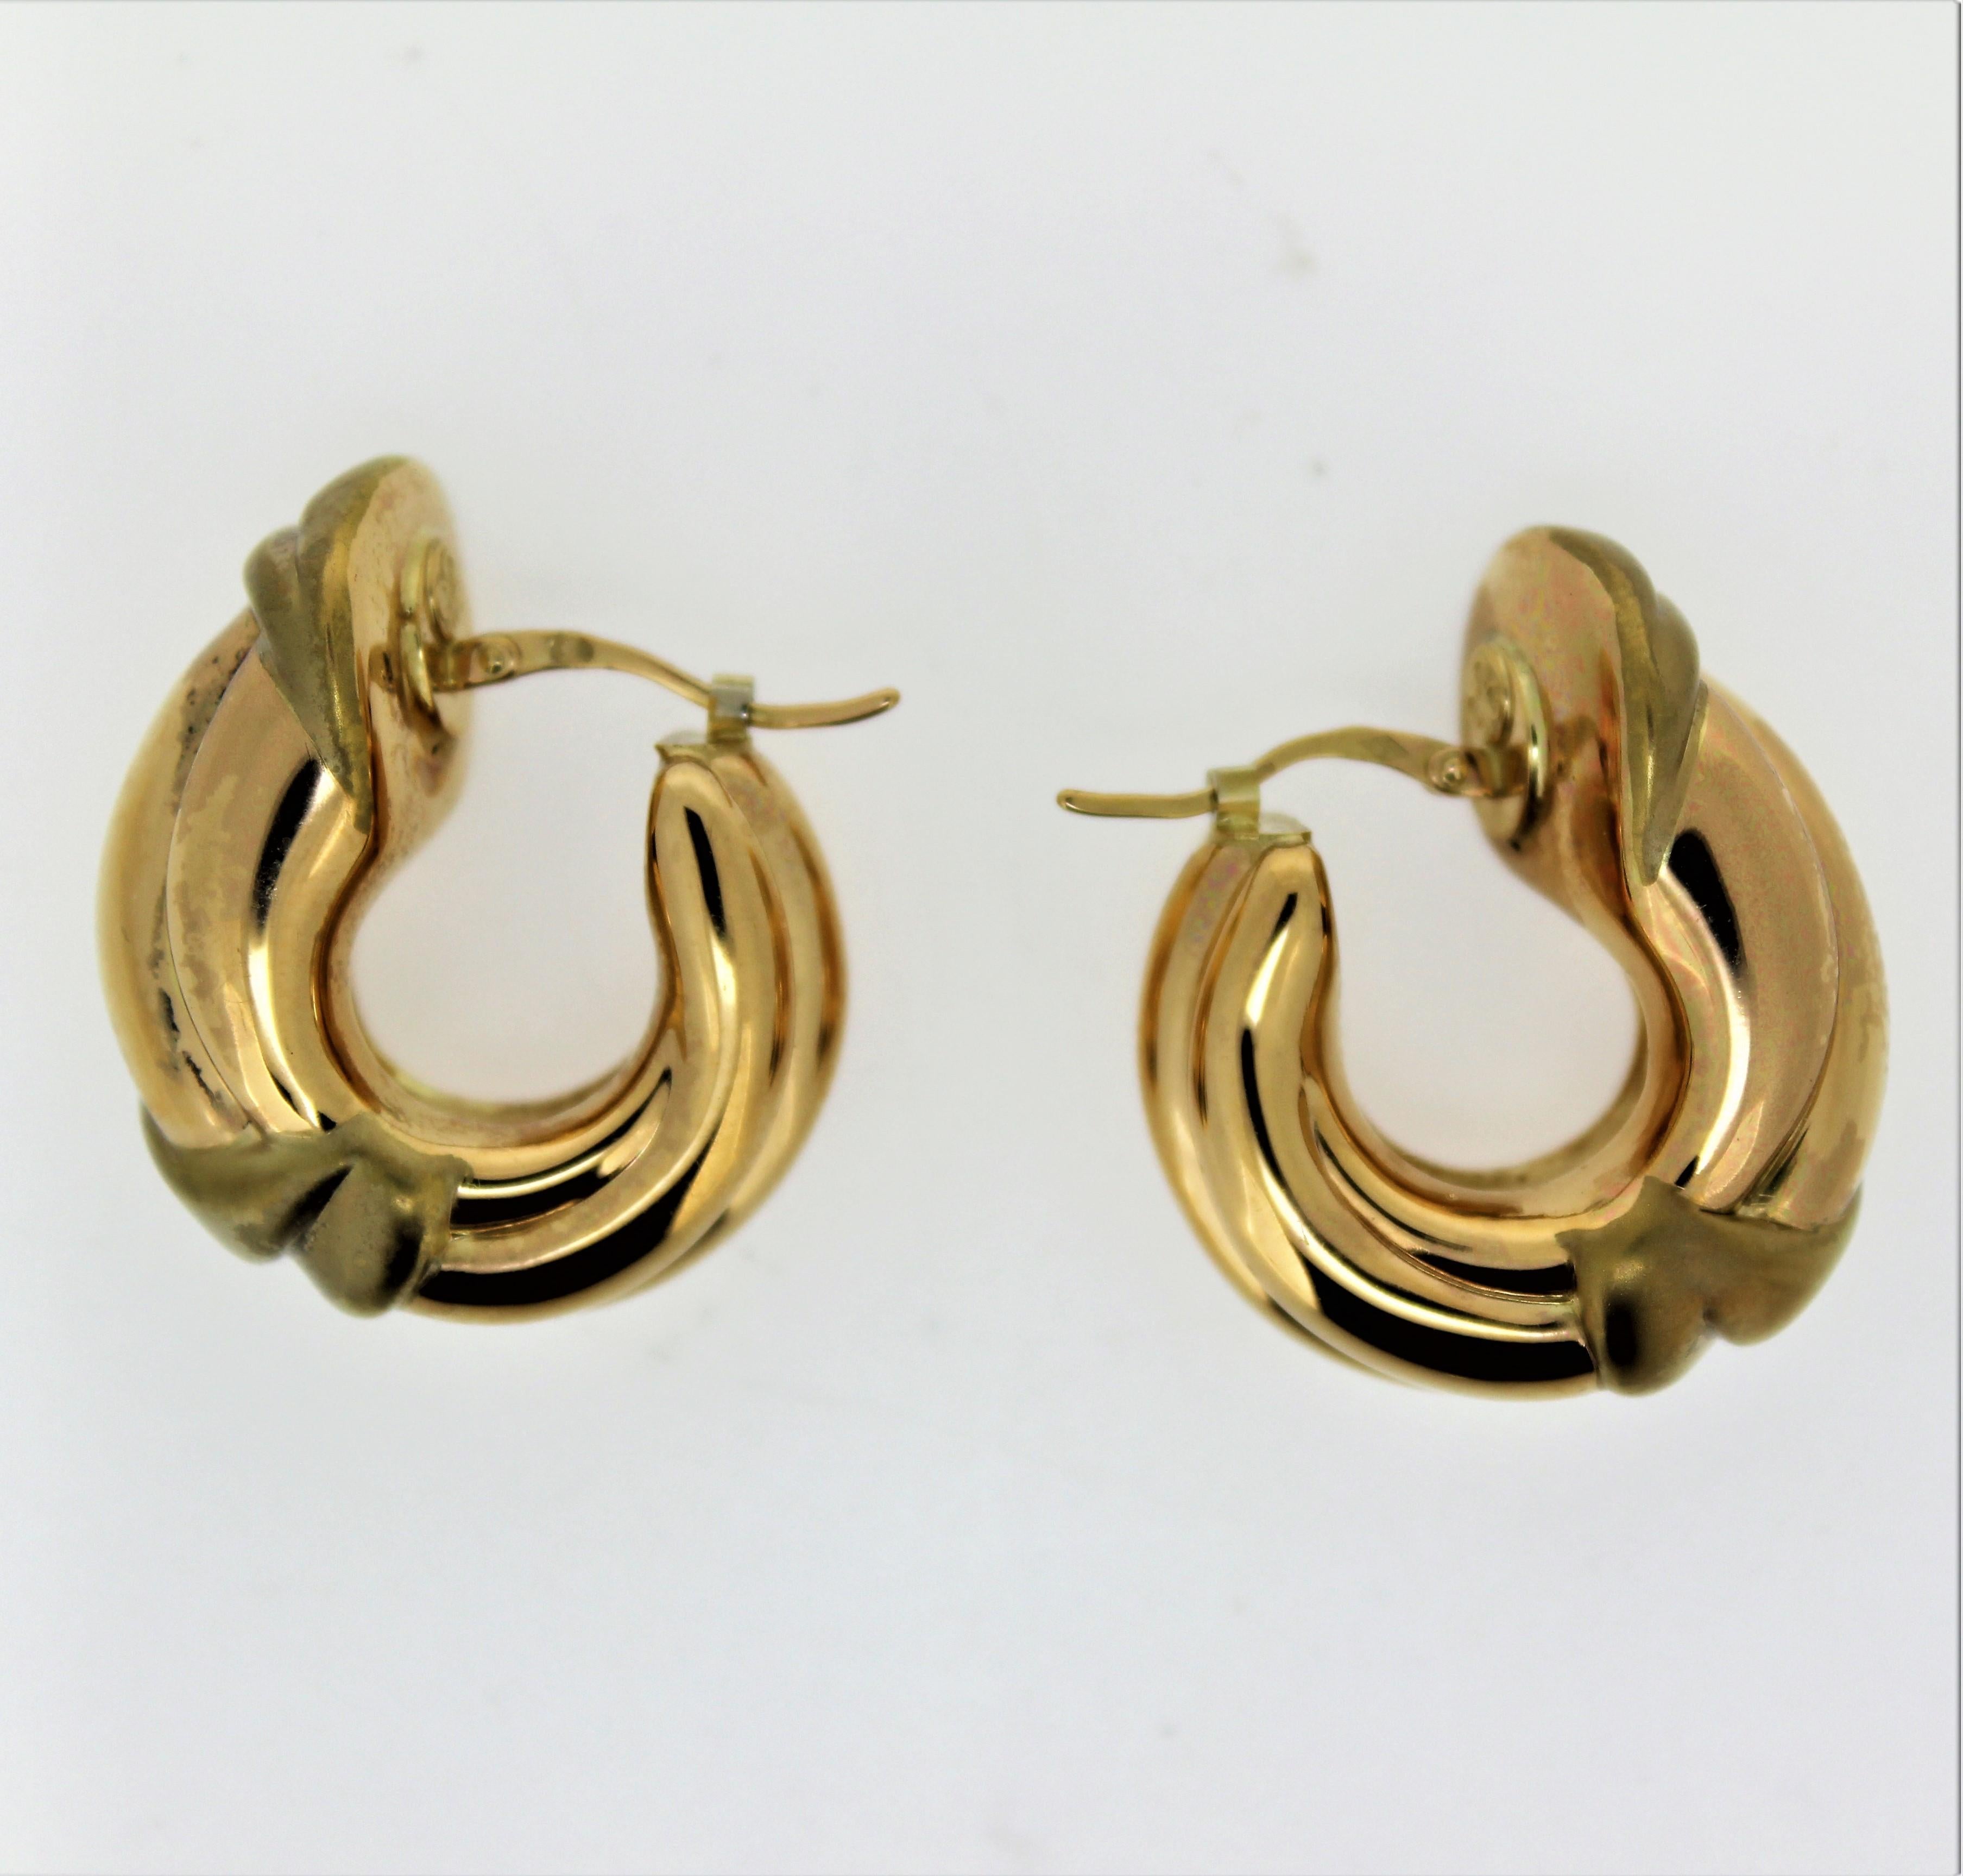 This is one of many Charles Garnier from Paris,  18 karat yellow gold hollow hoop earrings.
This collection is from a close out store with its left over stock still in the safe.
Circa 1980's
This designs are extremely detailed with light weight easy